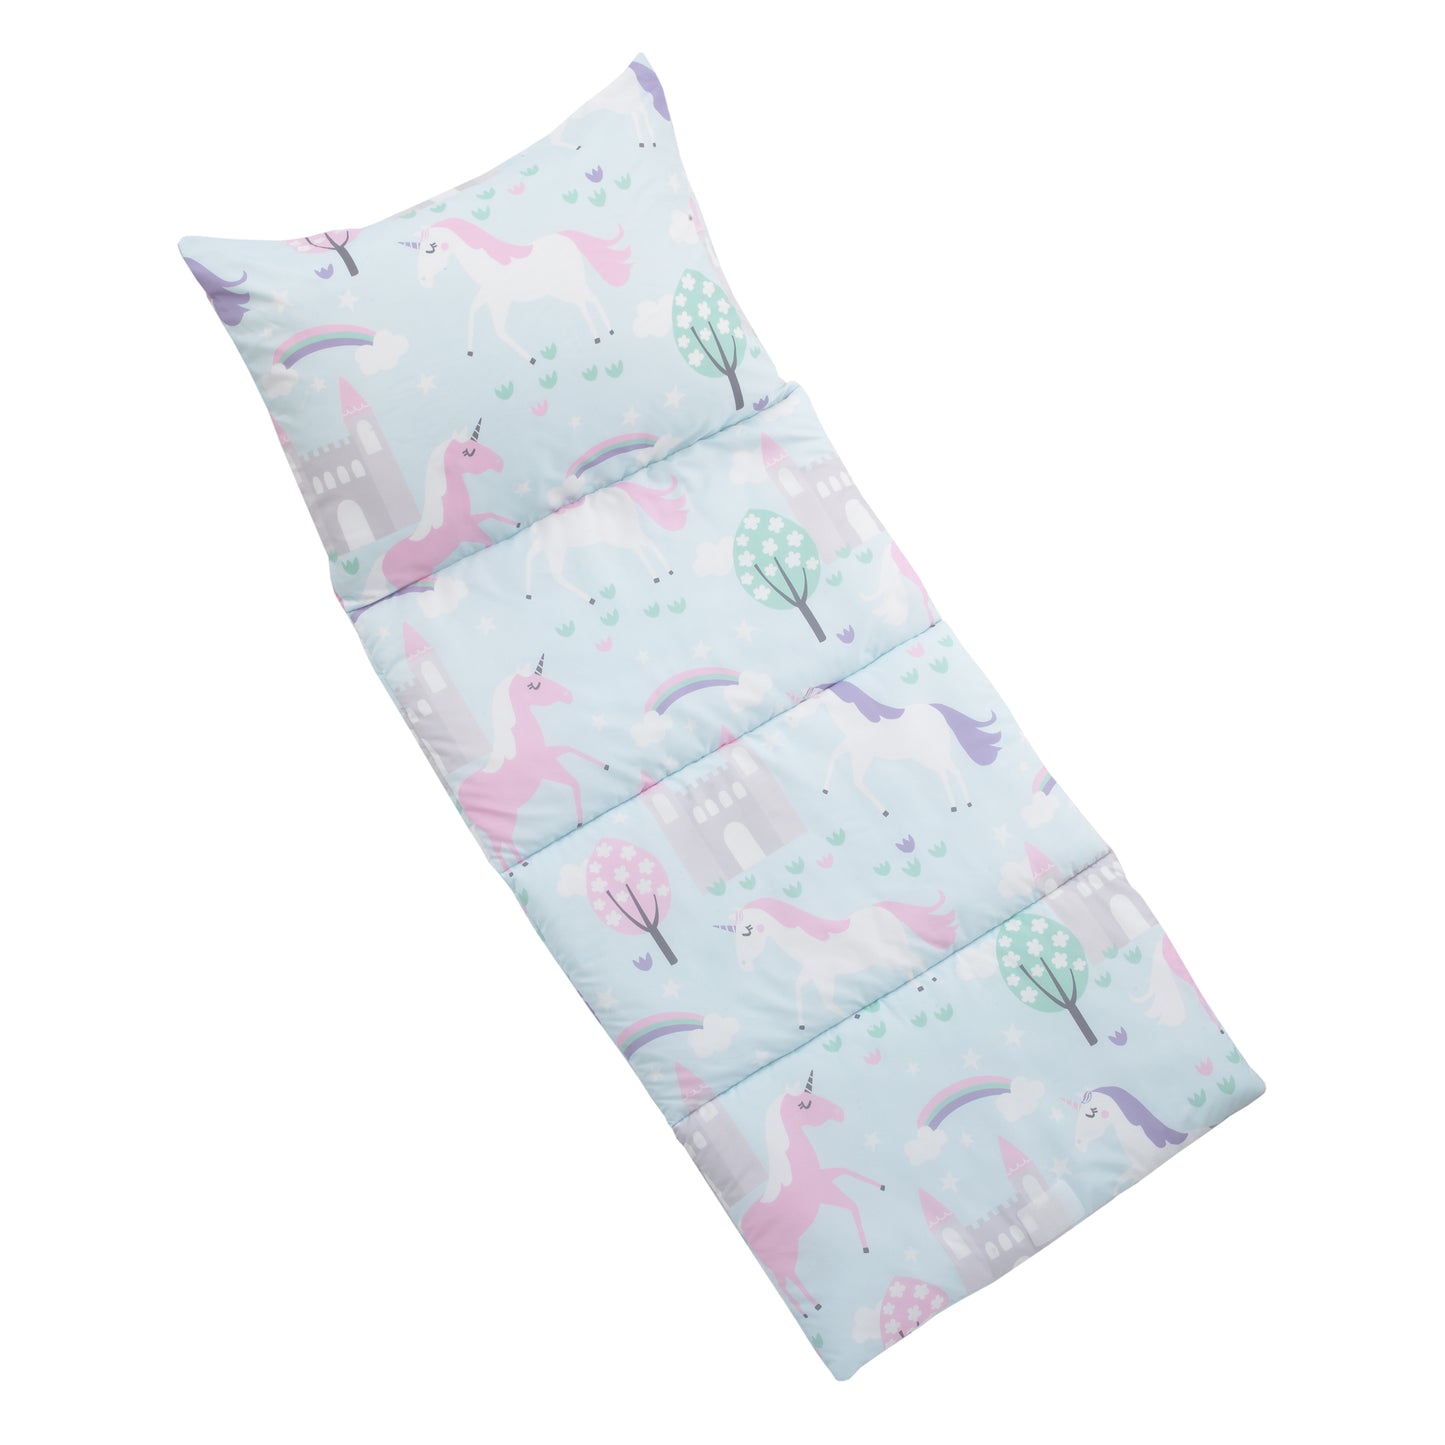 Everything Kids Pink, Light Blue and Lavender Unicorn Deluxe Easy Fold Nap Mat